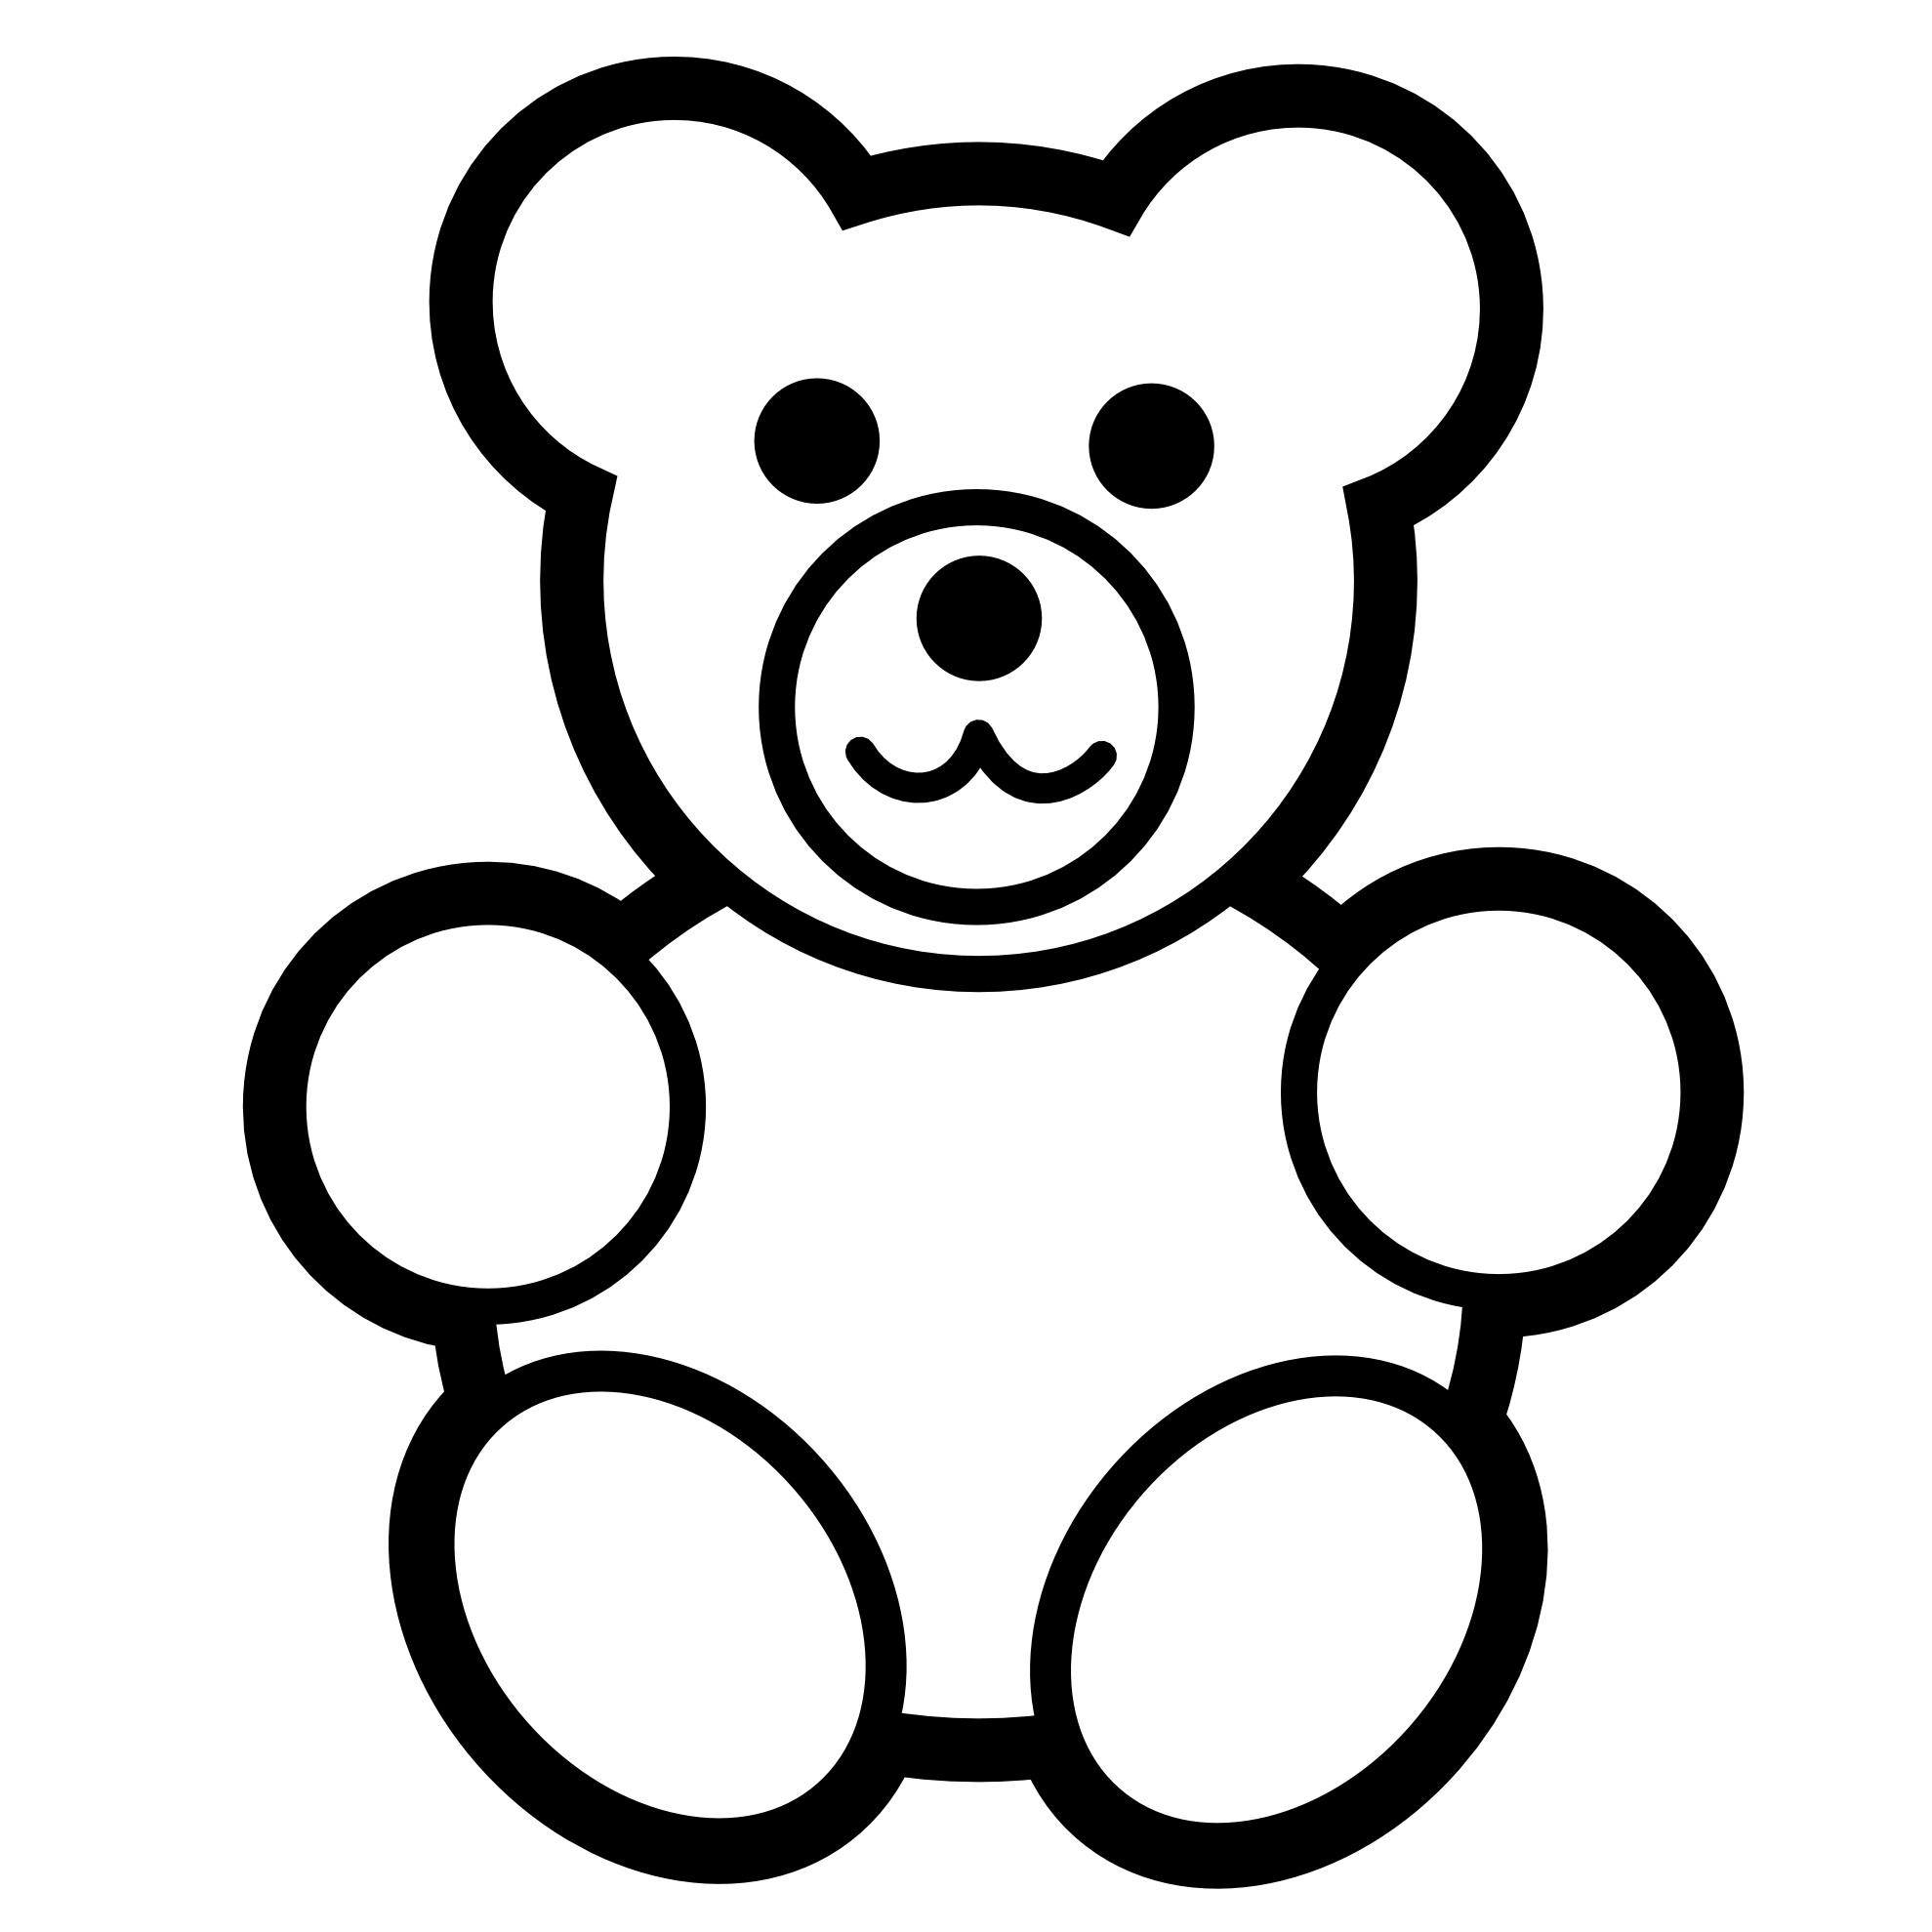 Download Free Printable Teddy Bear Coloring Pages For Kids